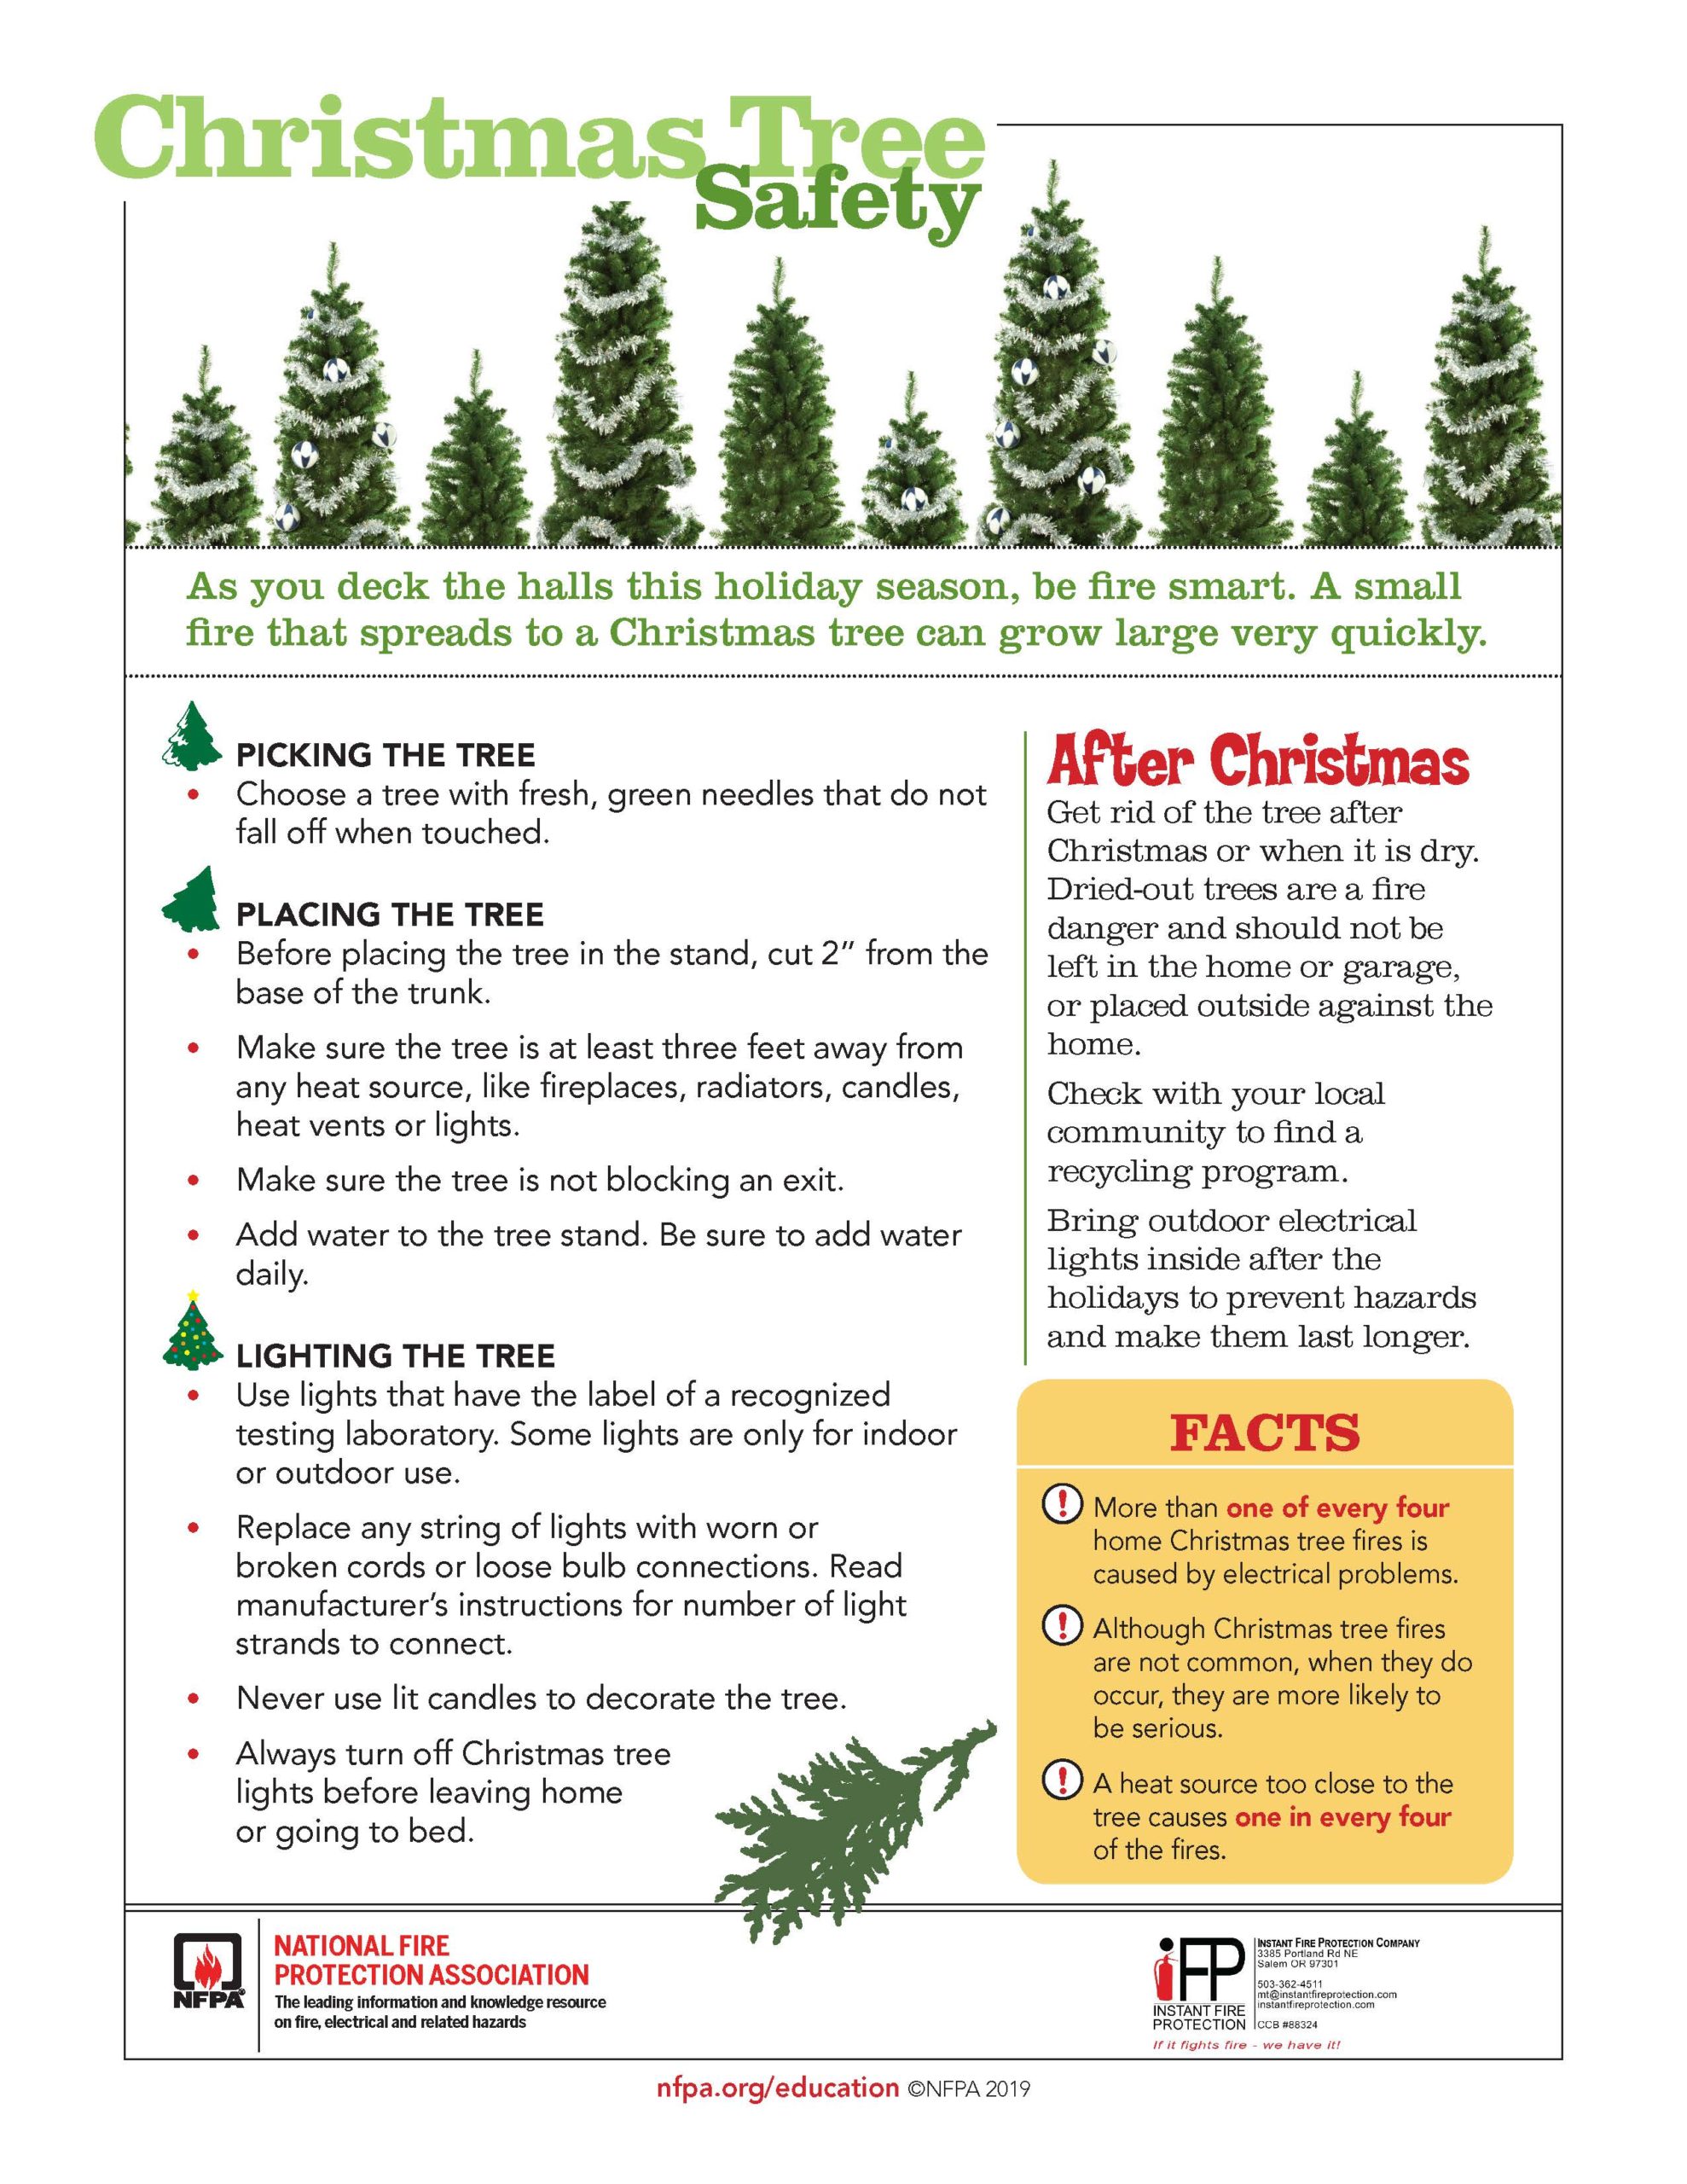 Safety tip sheet for Christmas trees